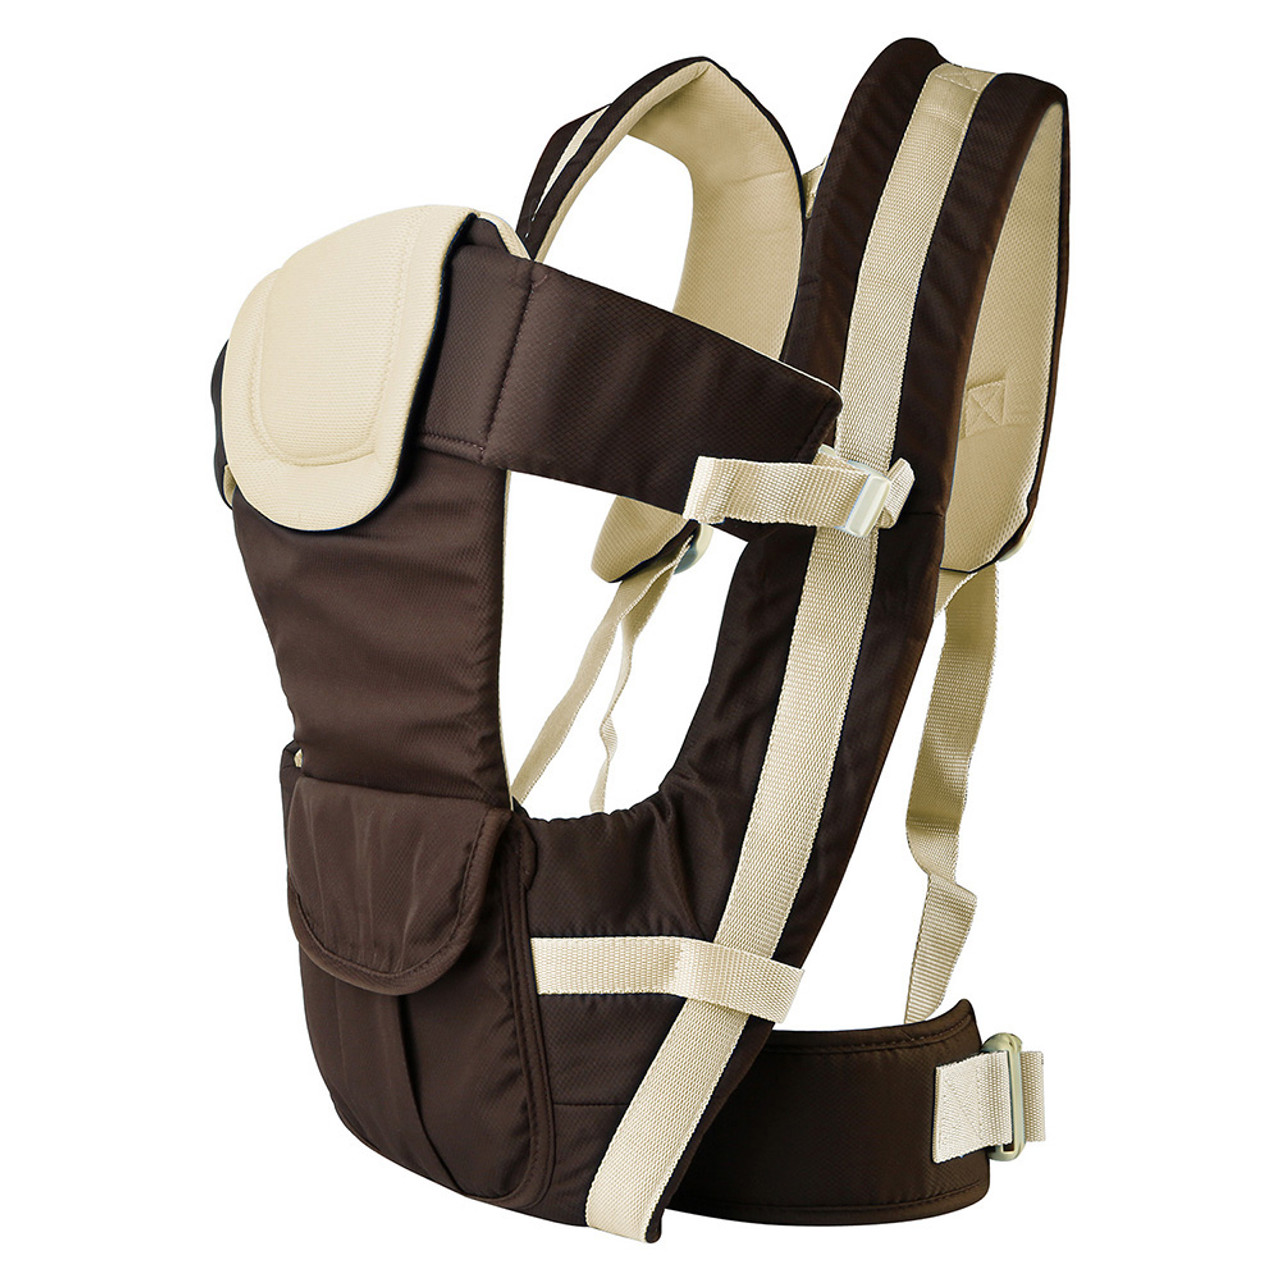 Adjustable Baby Carrier product image